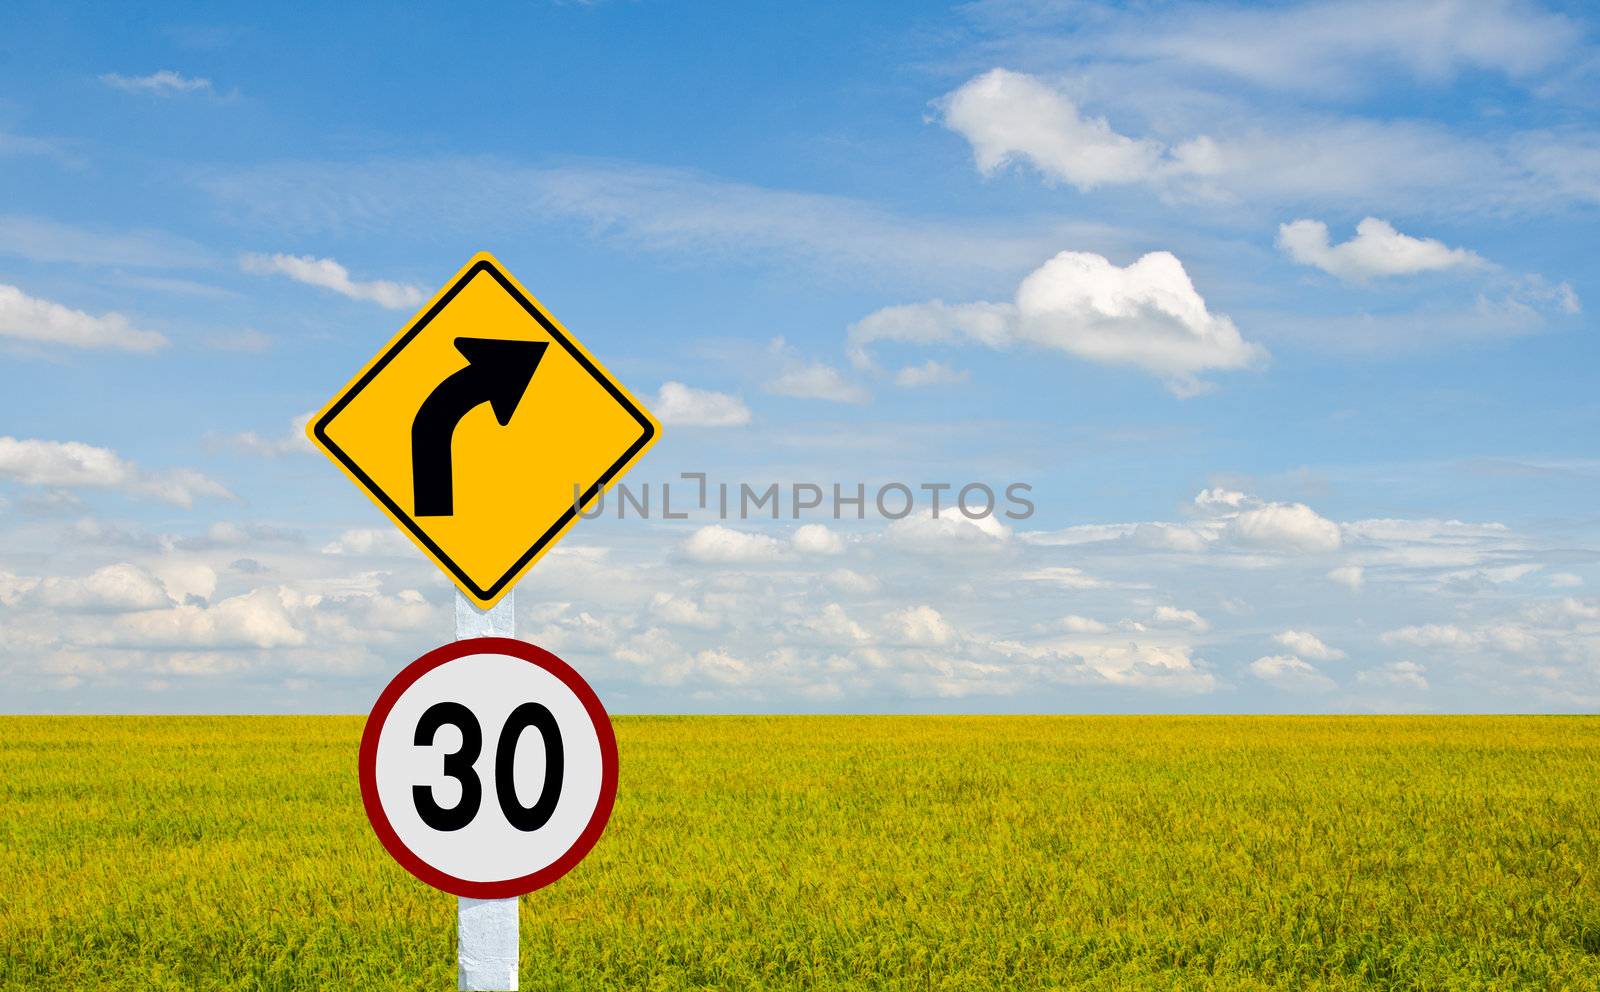 Traffic signs for speed limits up to 30 miles per hour.